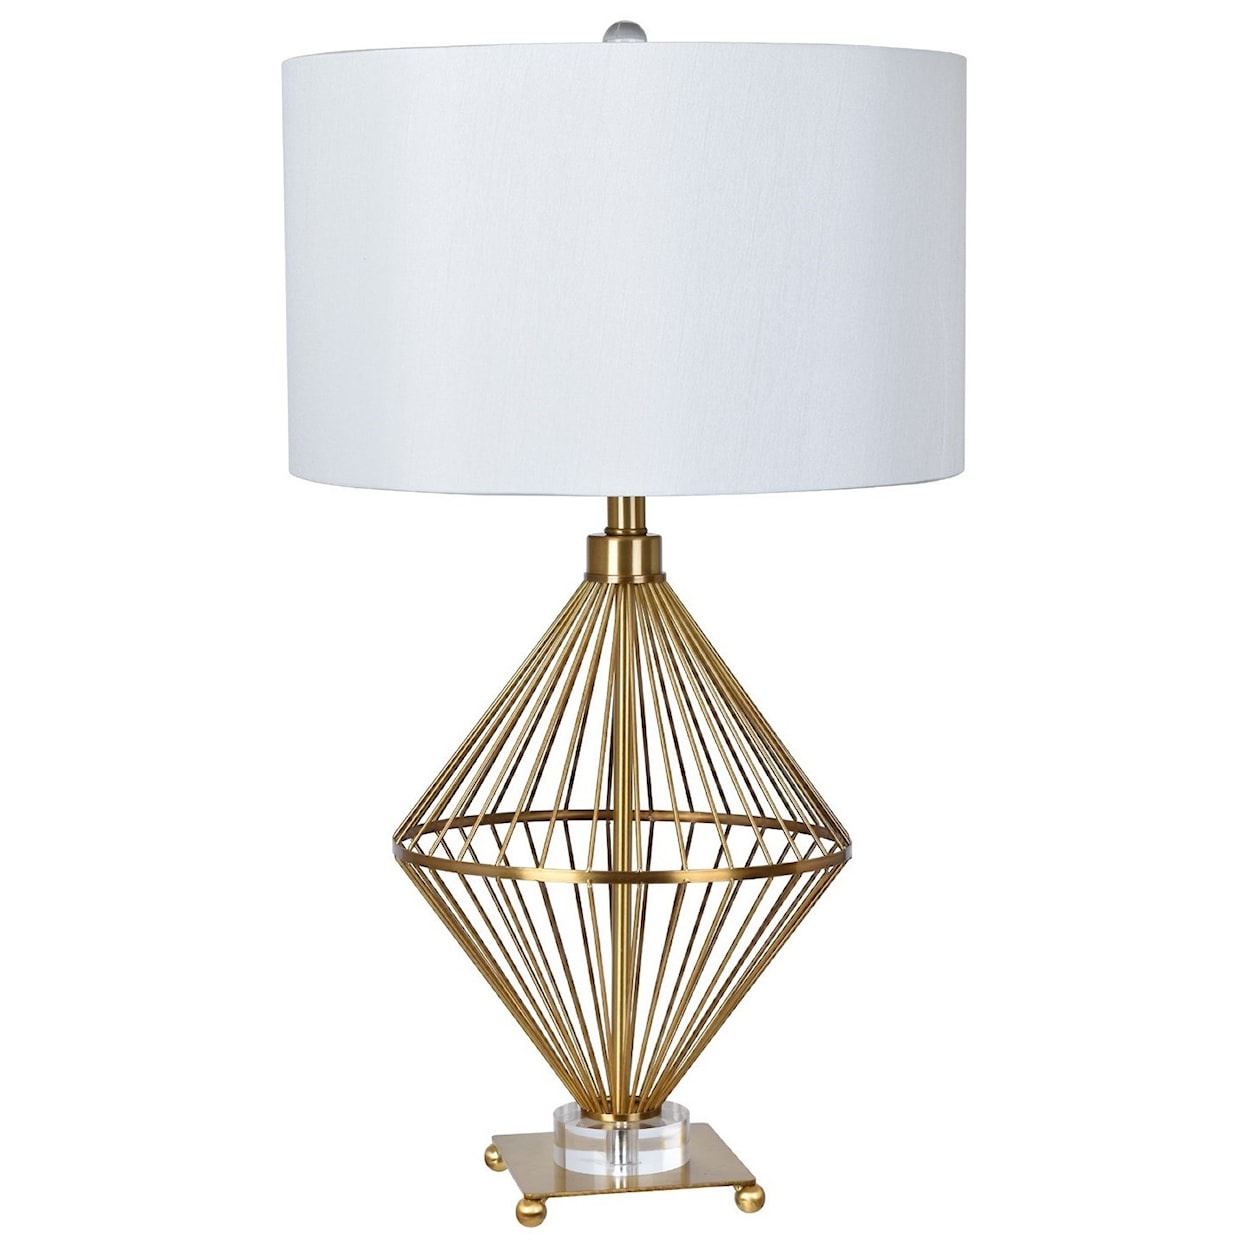 Crestview Collection Lighting Trina Table Lamp